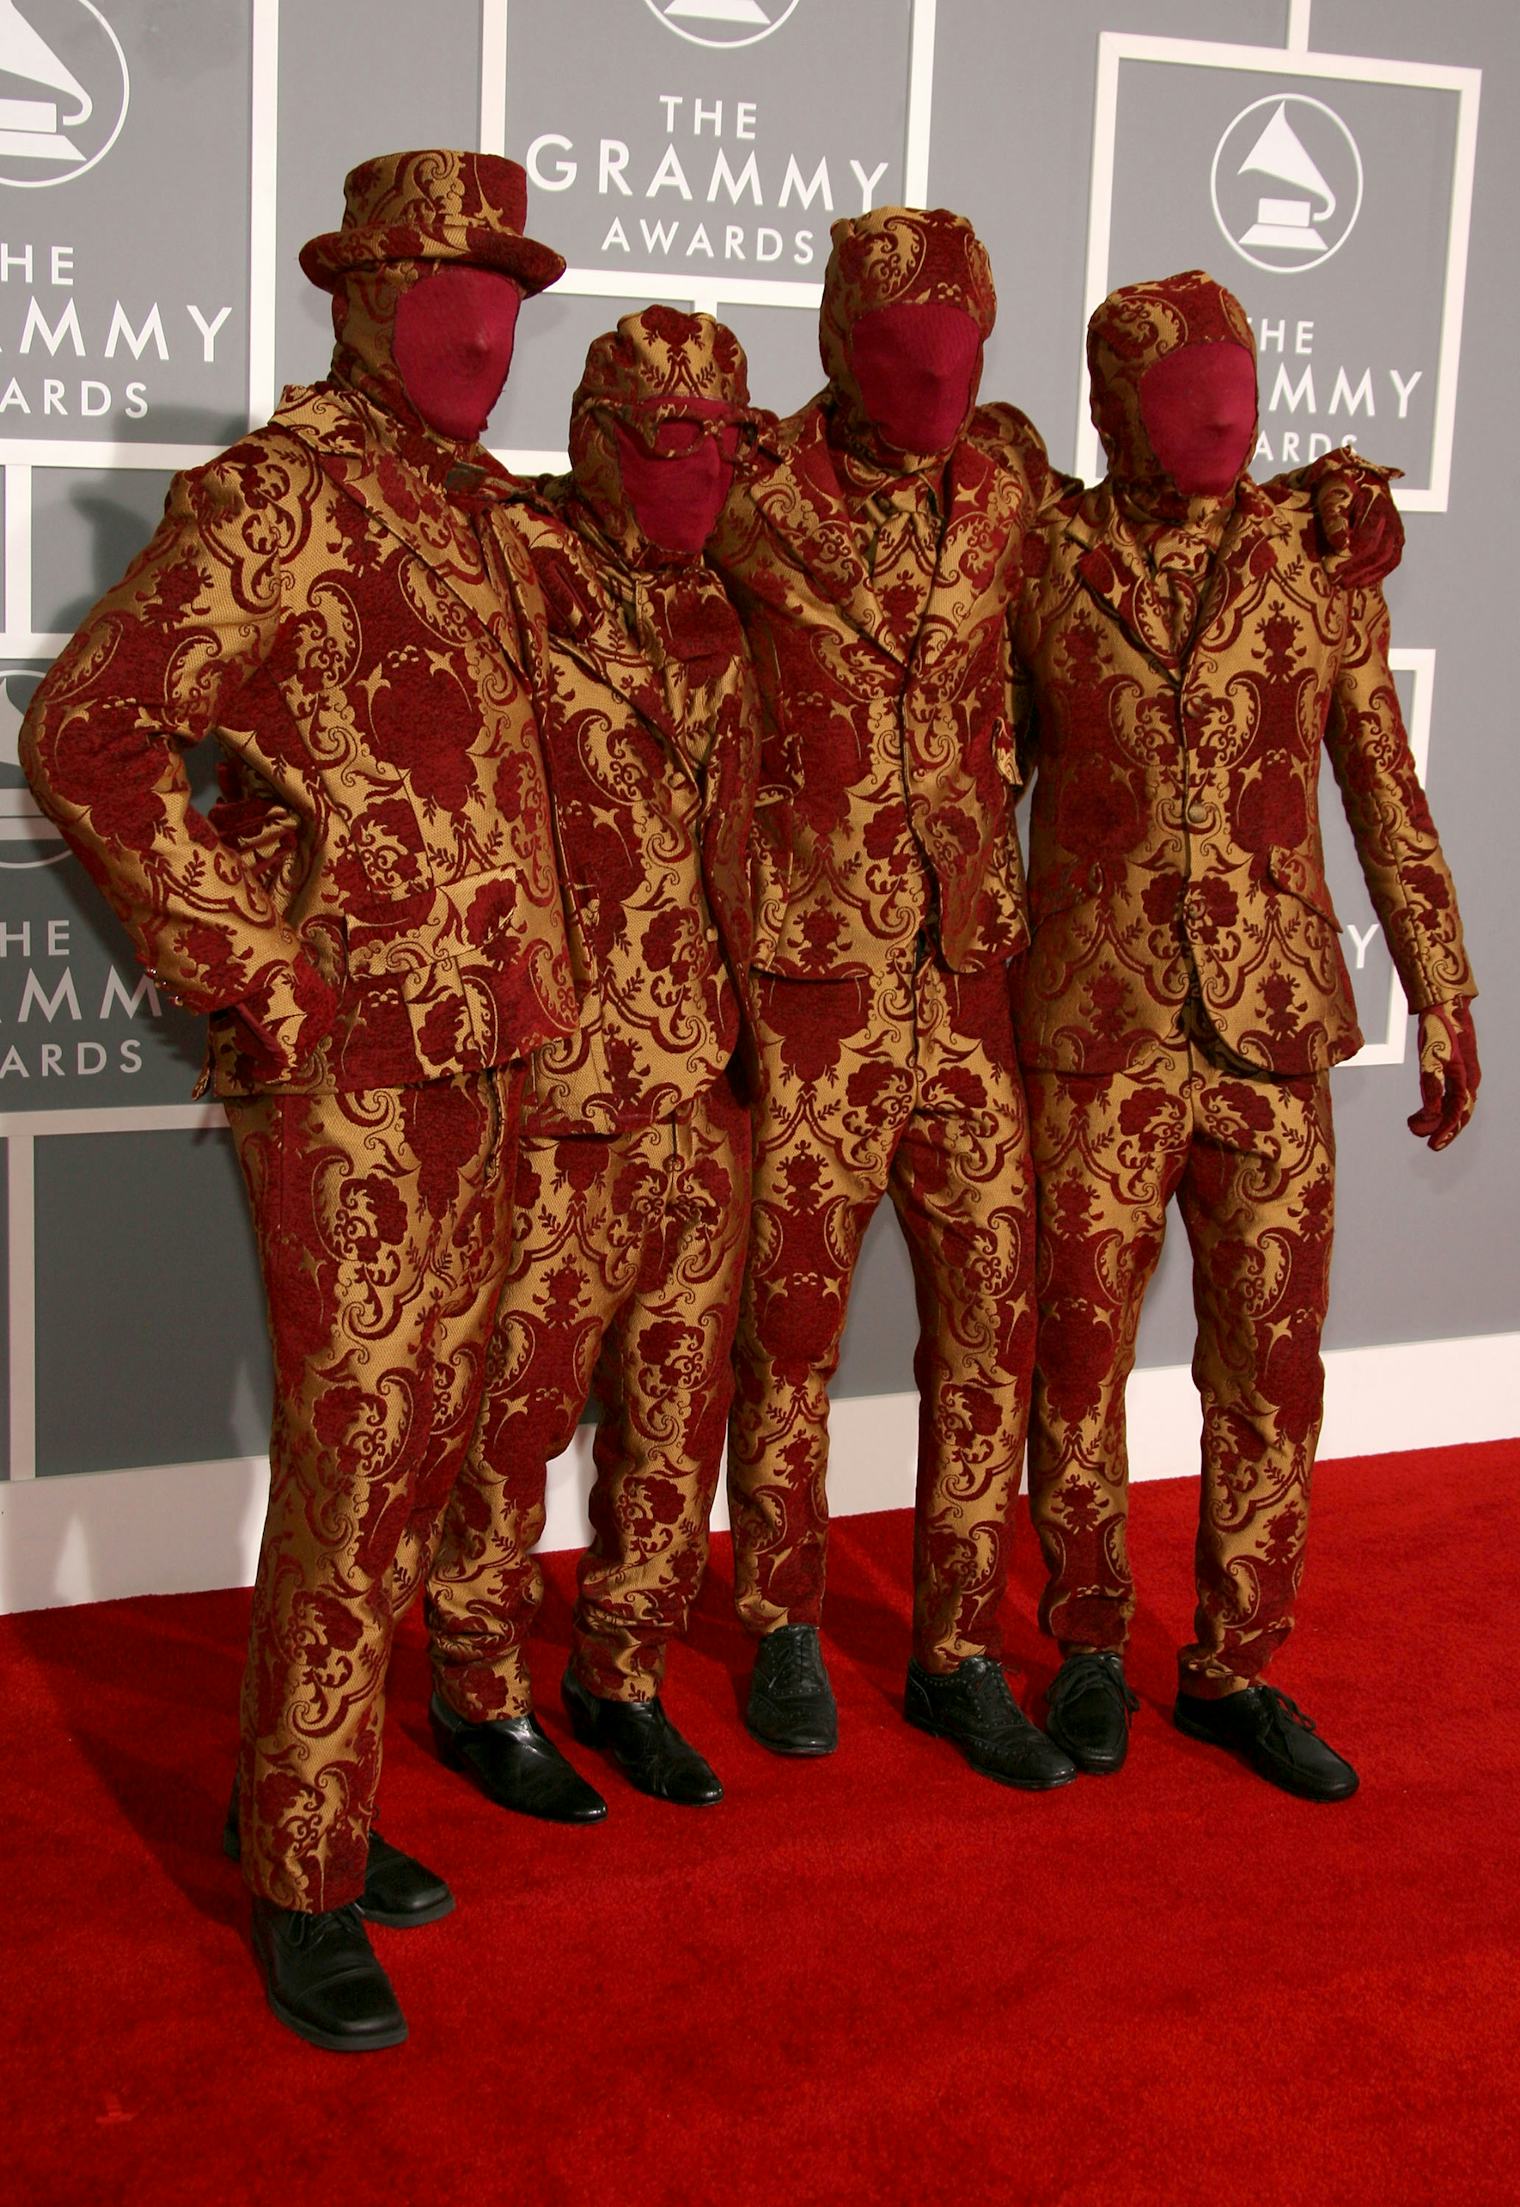 21 Insane Grammys Outfits That You Won't Be Able To Erase From Your